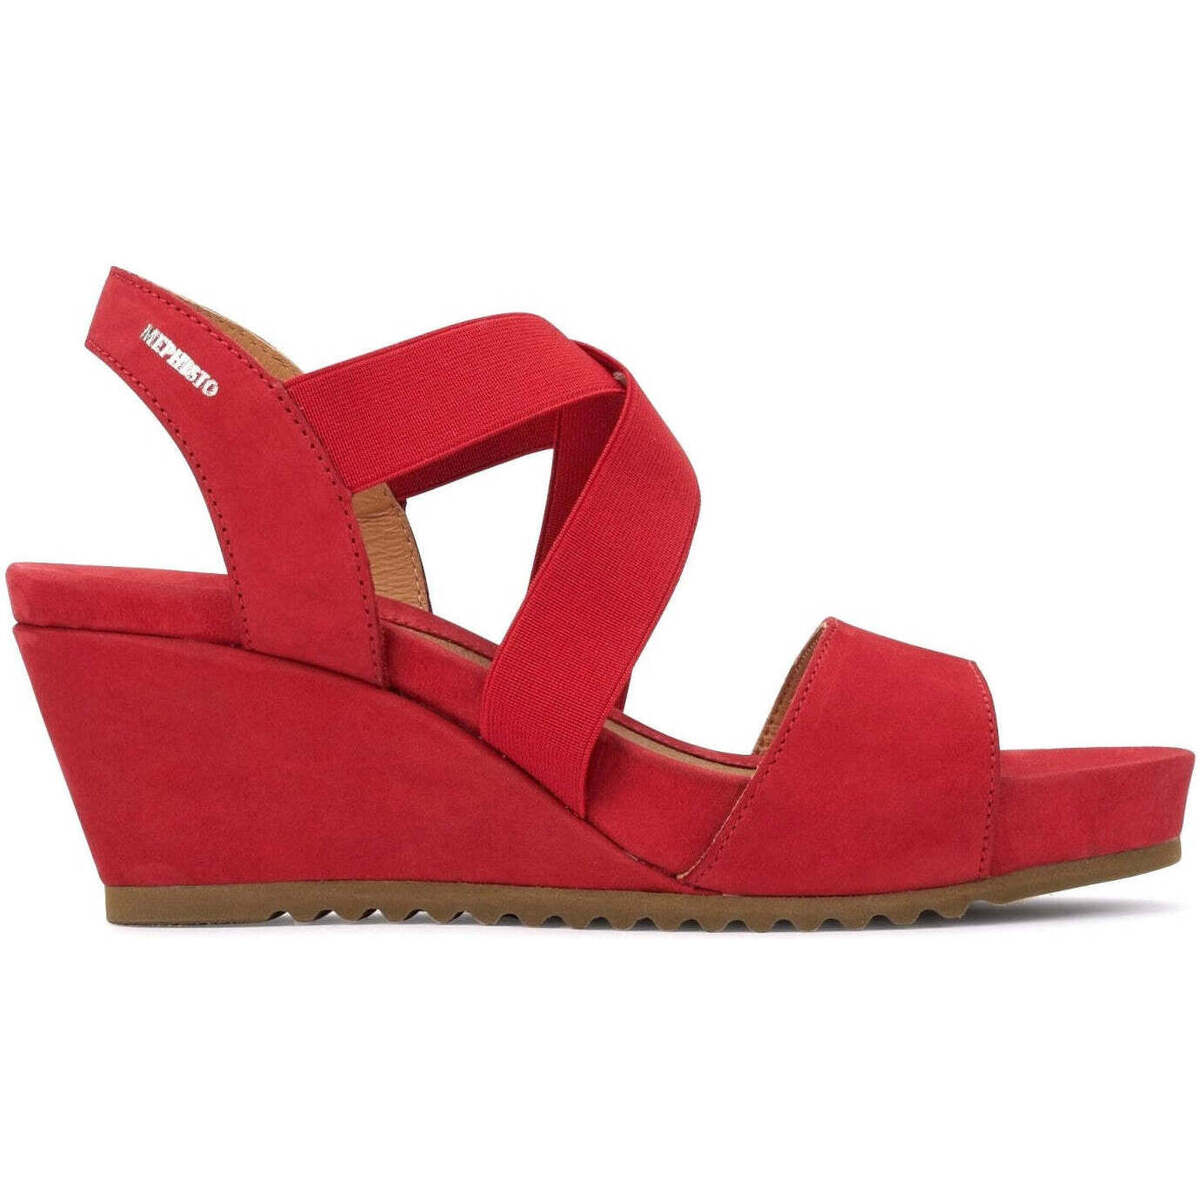 Chaussures Femme Sandales et Nu-pieds Mephisto Giuliana Rouge